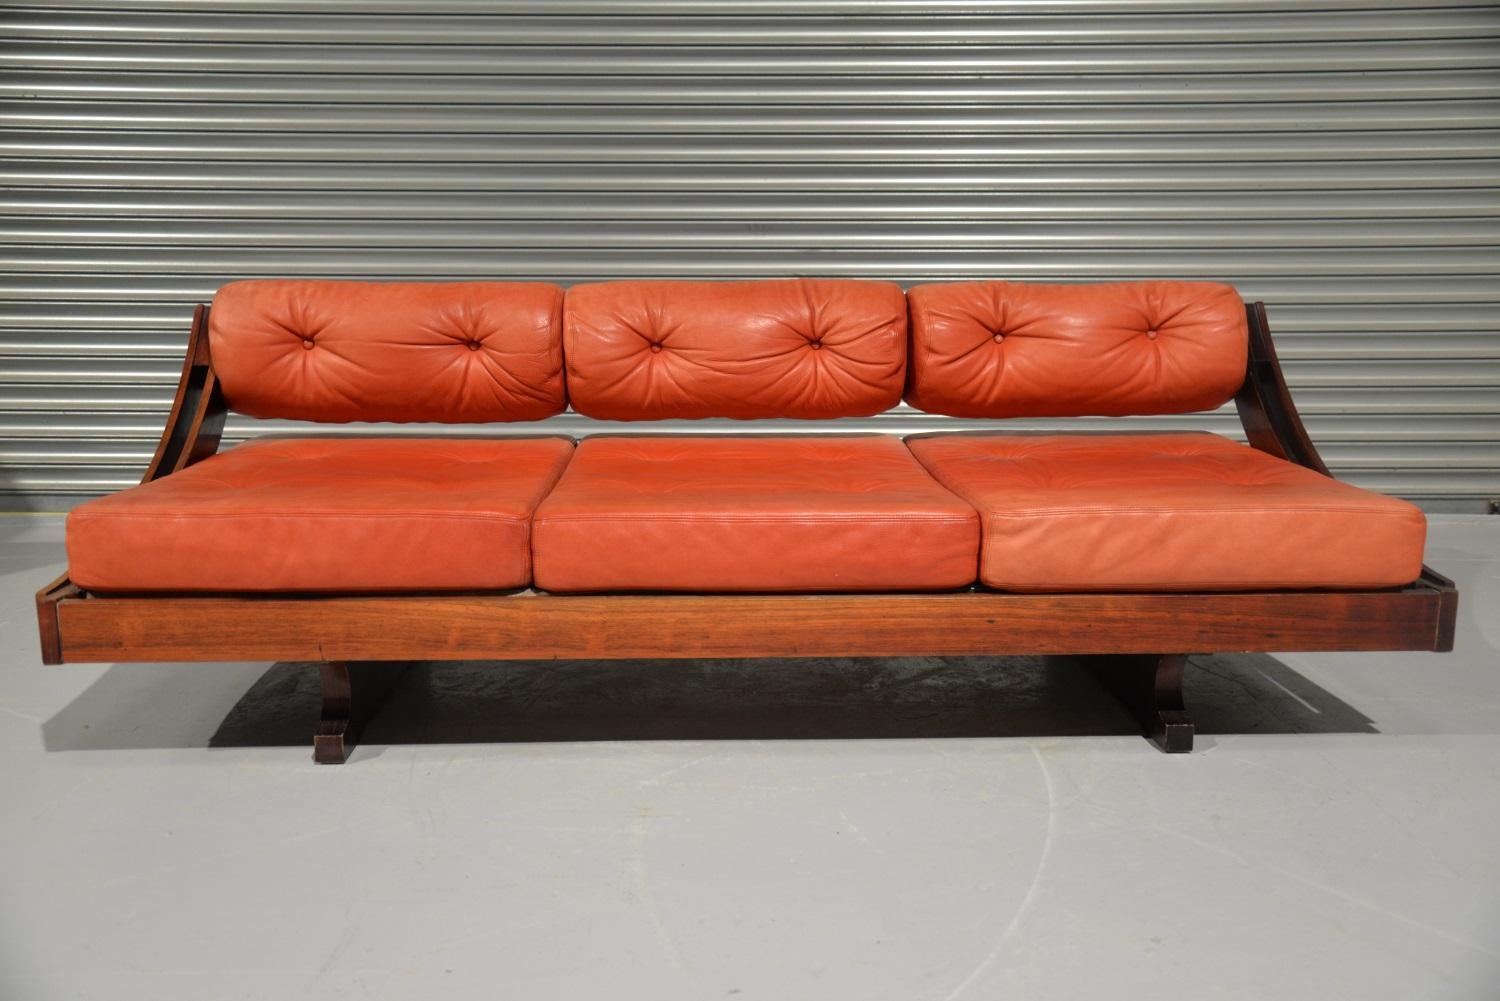 Discounted airfreight for our US and International customers (from 2 weeks door to door).

We are delighted to bring to you an extremely rare Italian daybed designed by Gianni Songia for Sormani in 1963. The elegant frame is built from rosewood, can